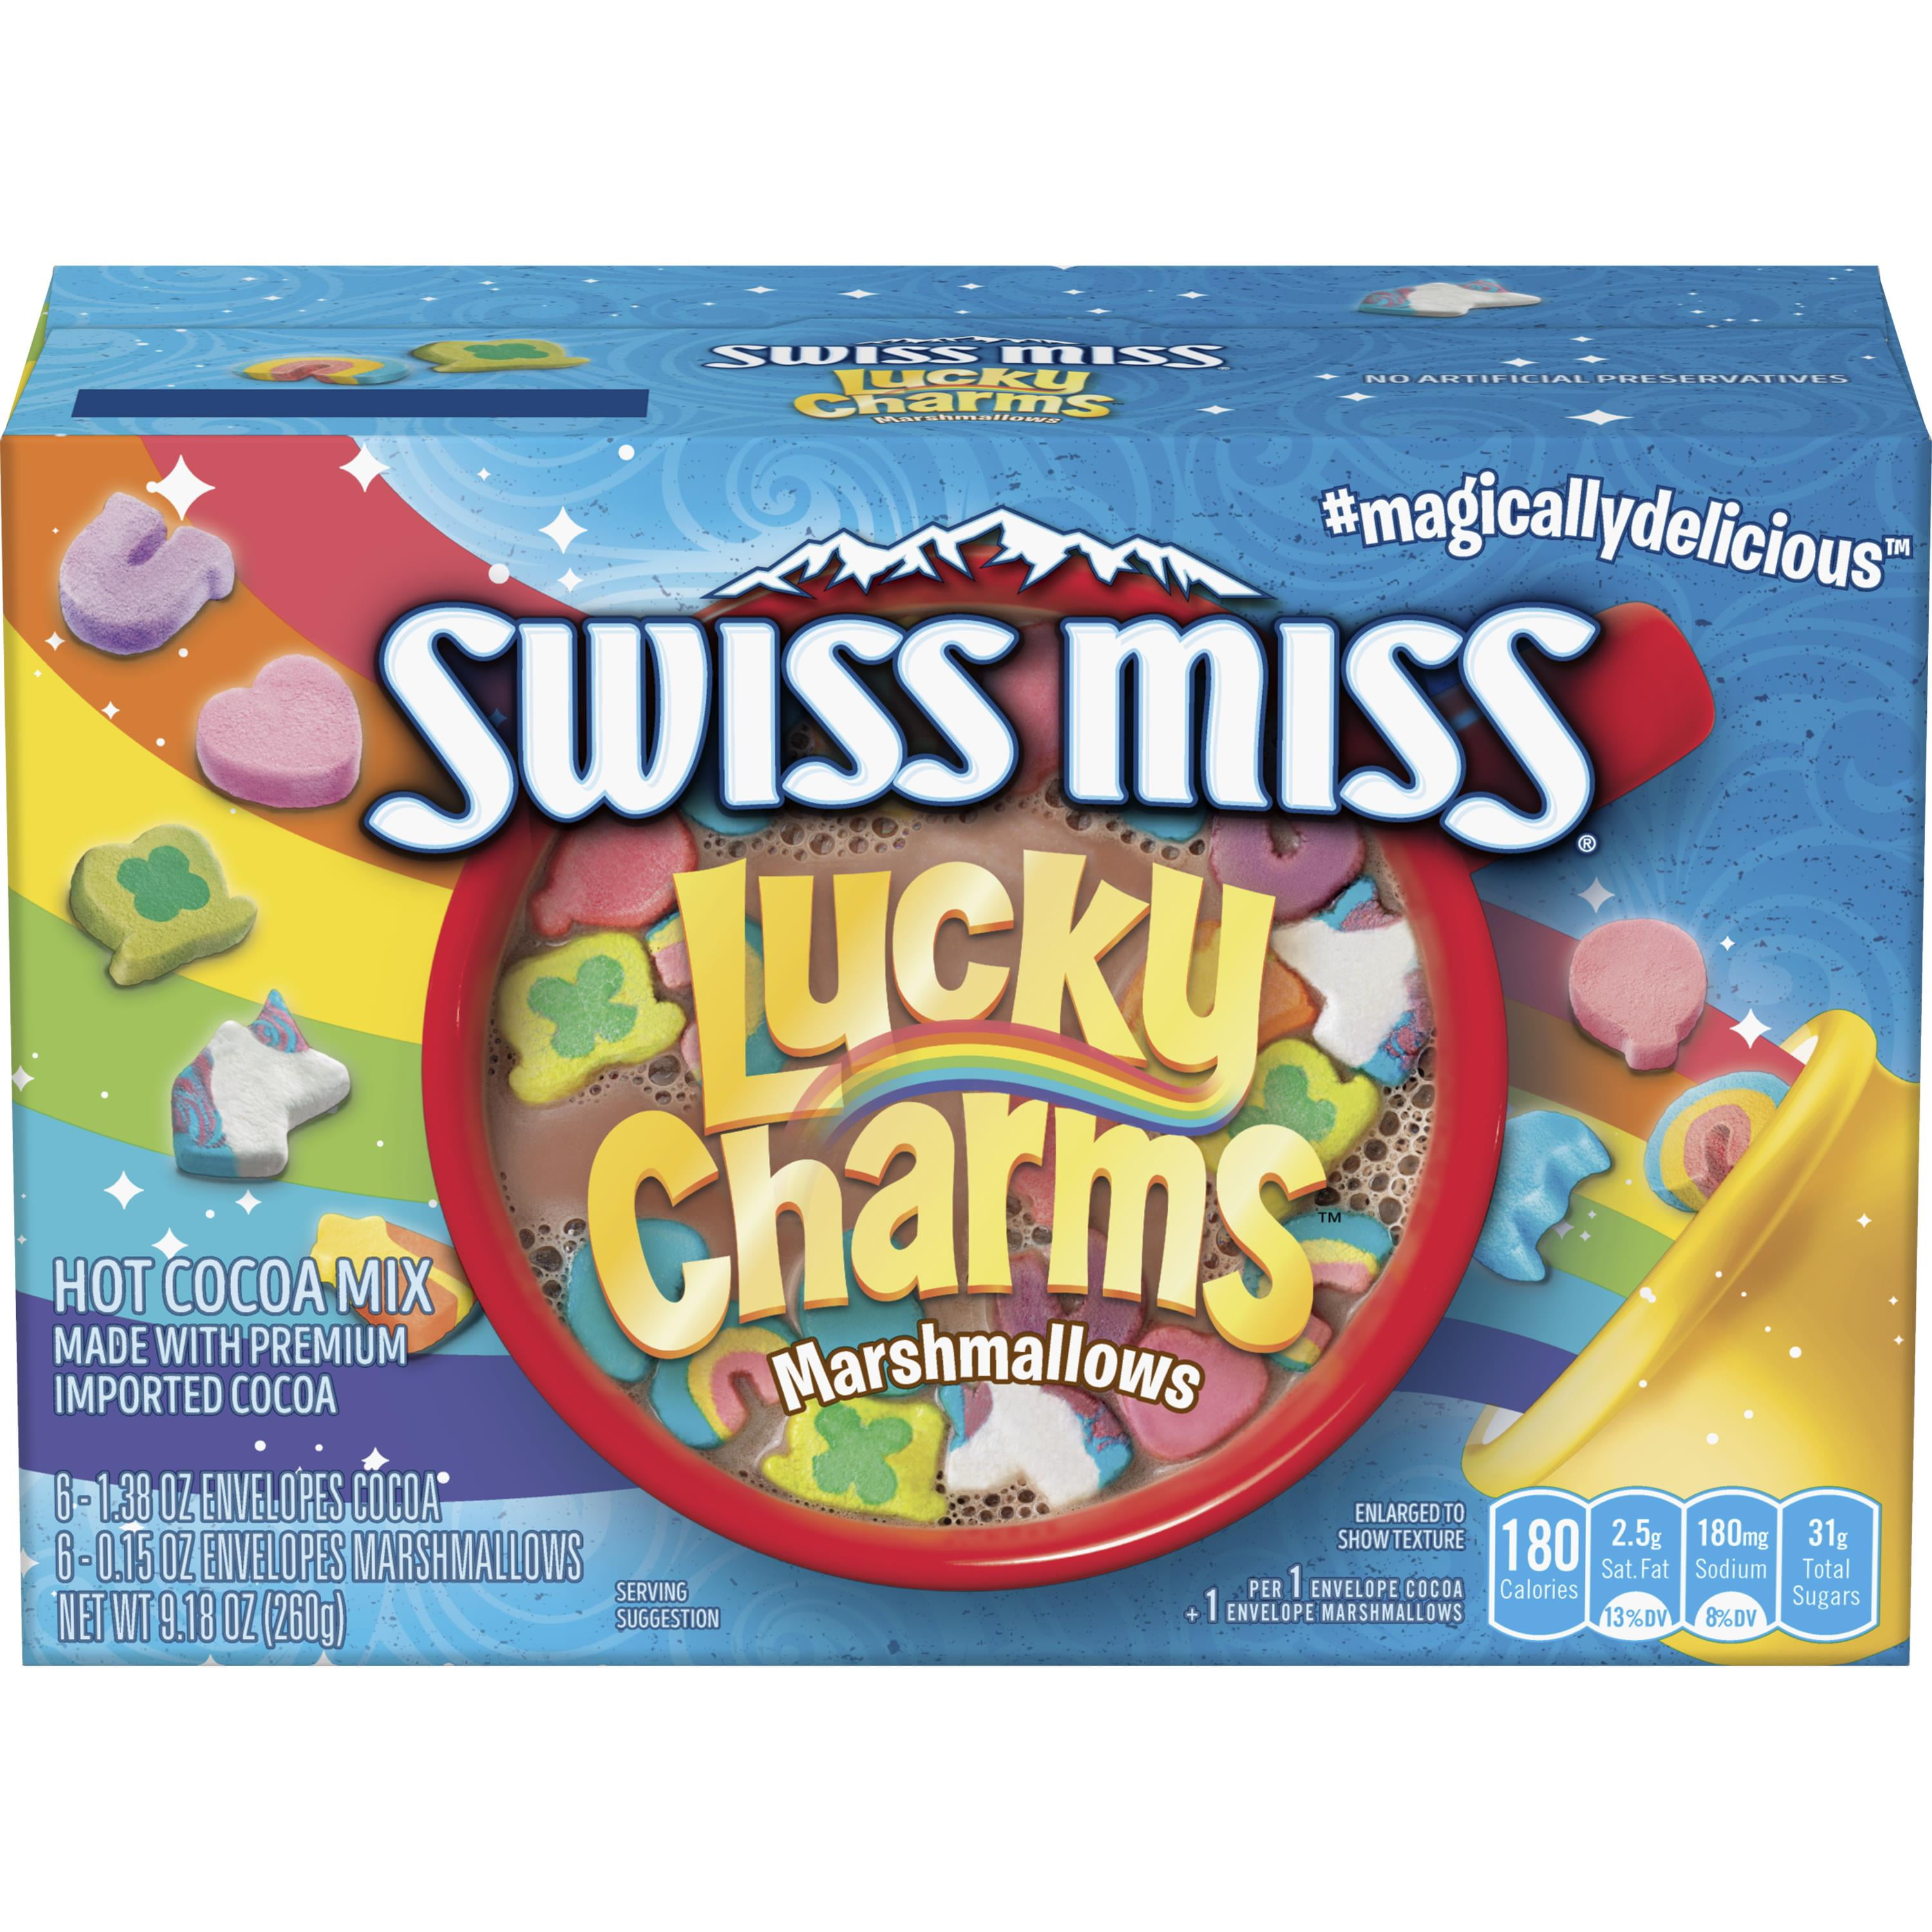 Swiss Miss Chocolate Flavored Hot Cocoa Mix with Lucky Charms Marshmallows, 6 Count Hot Cocoa Mix Packets (8 Pack)